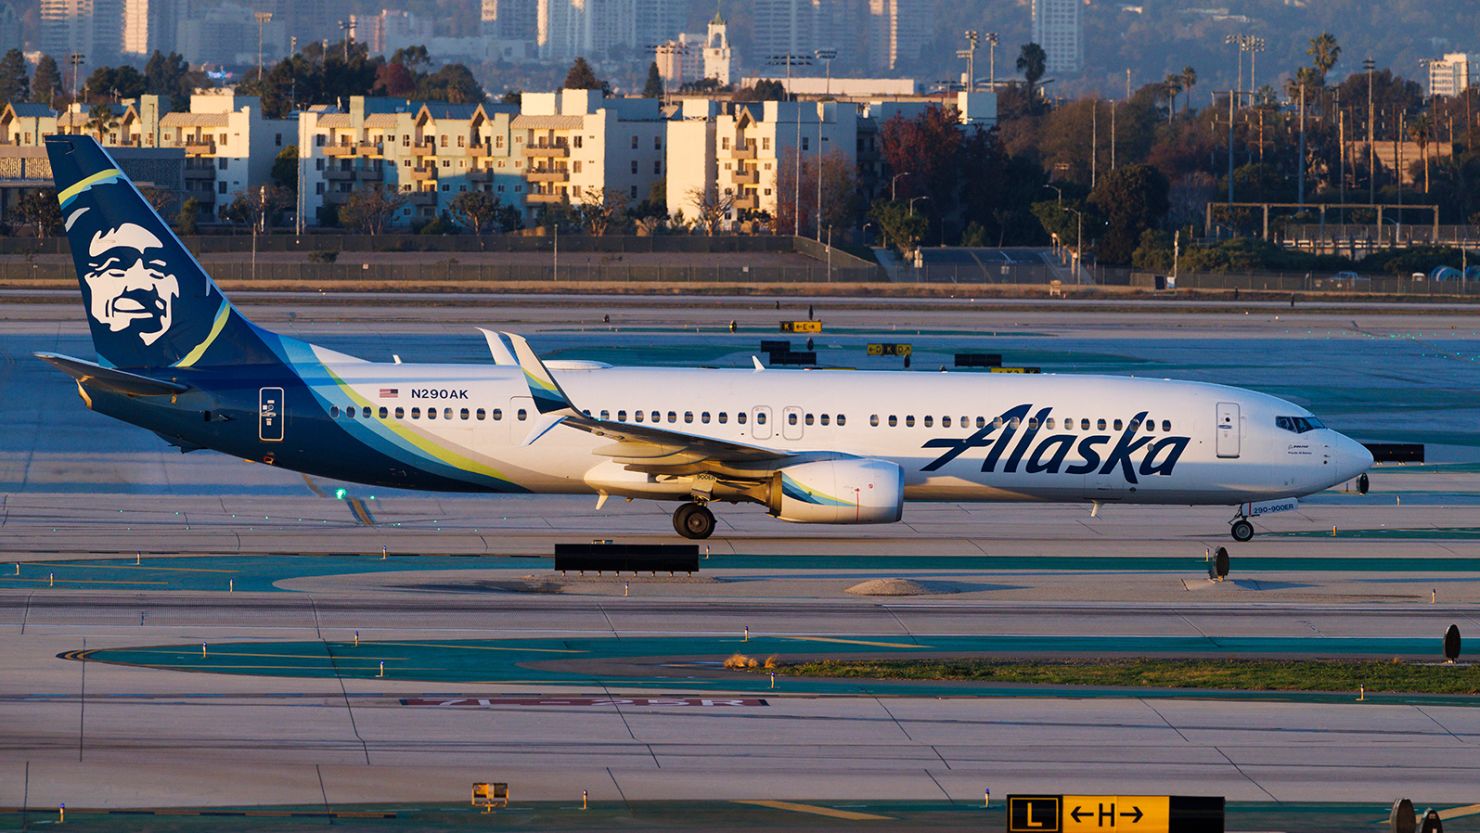 Alaska Airlines taxis at Los Angeles International Airport, Monday, Dec. 12, 2022 in Los Angeles. (Ric Tapia via AP)